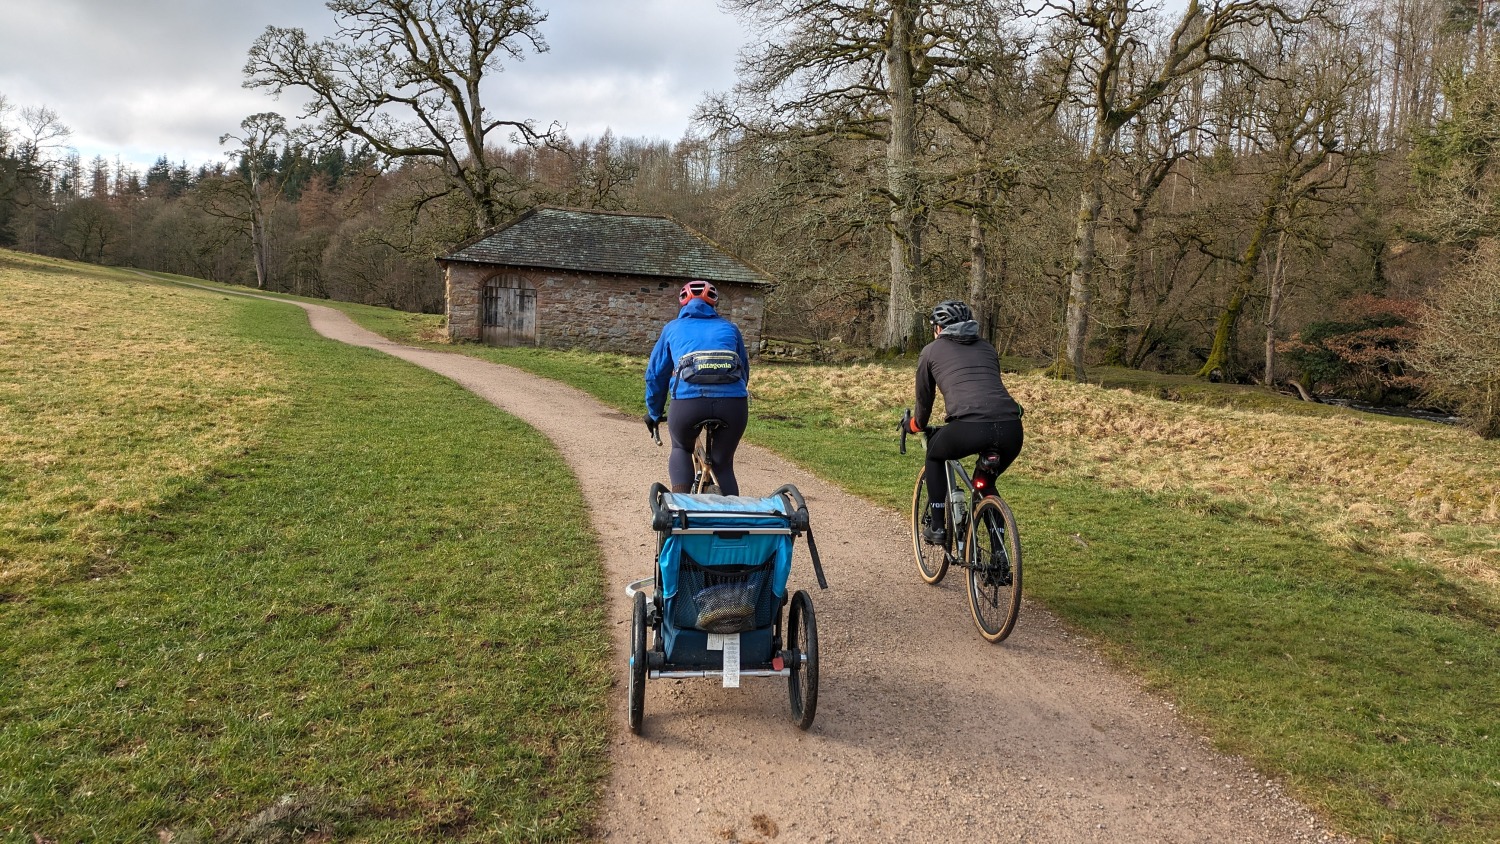 bike ride on a smooth gravel track, two women on bikes and a kids trailer